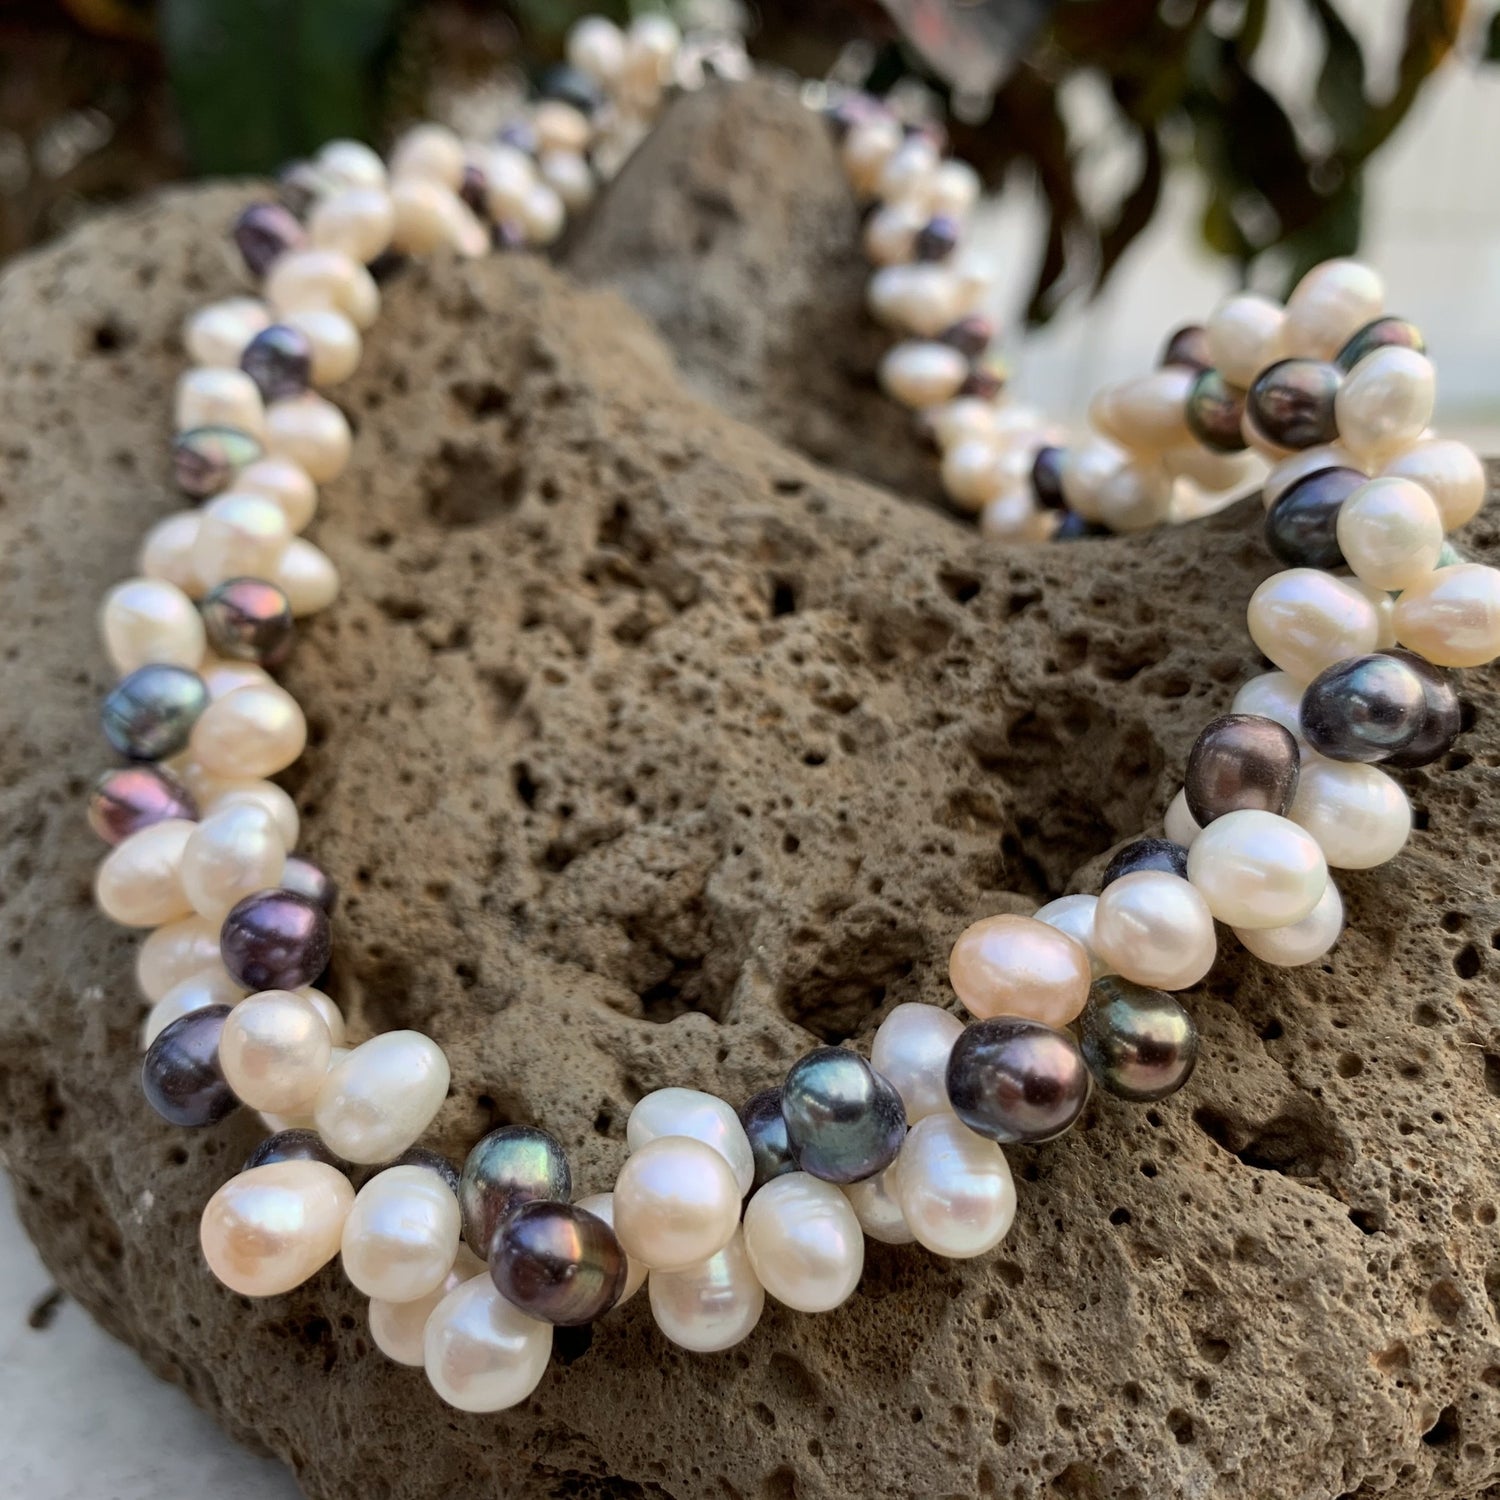 Cluster pearl necklace in mixed colors with black and white pearls.